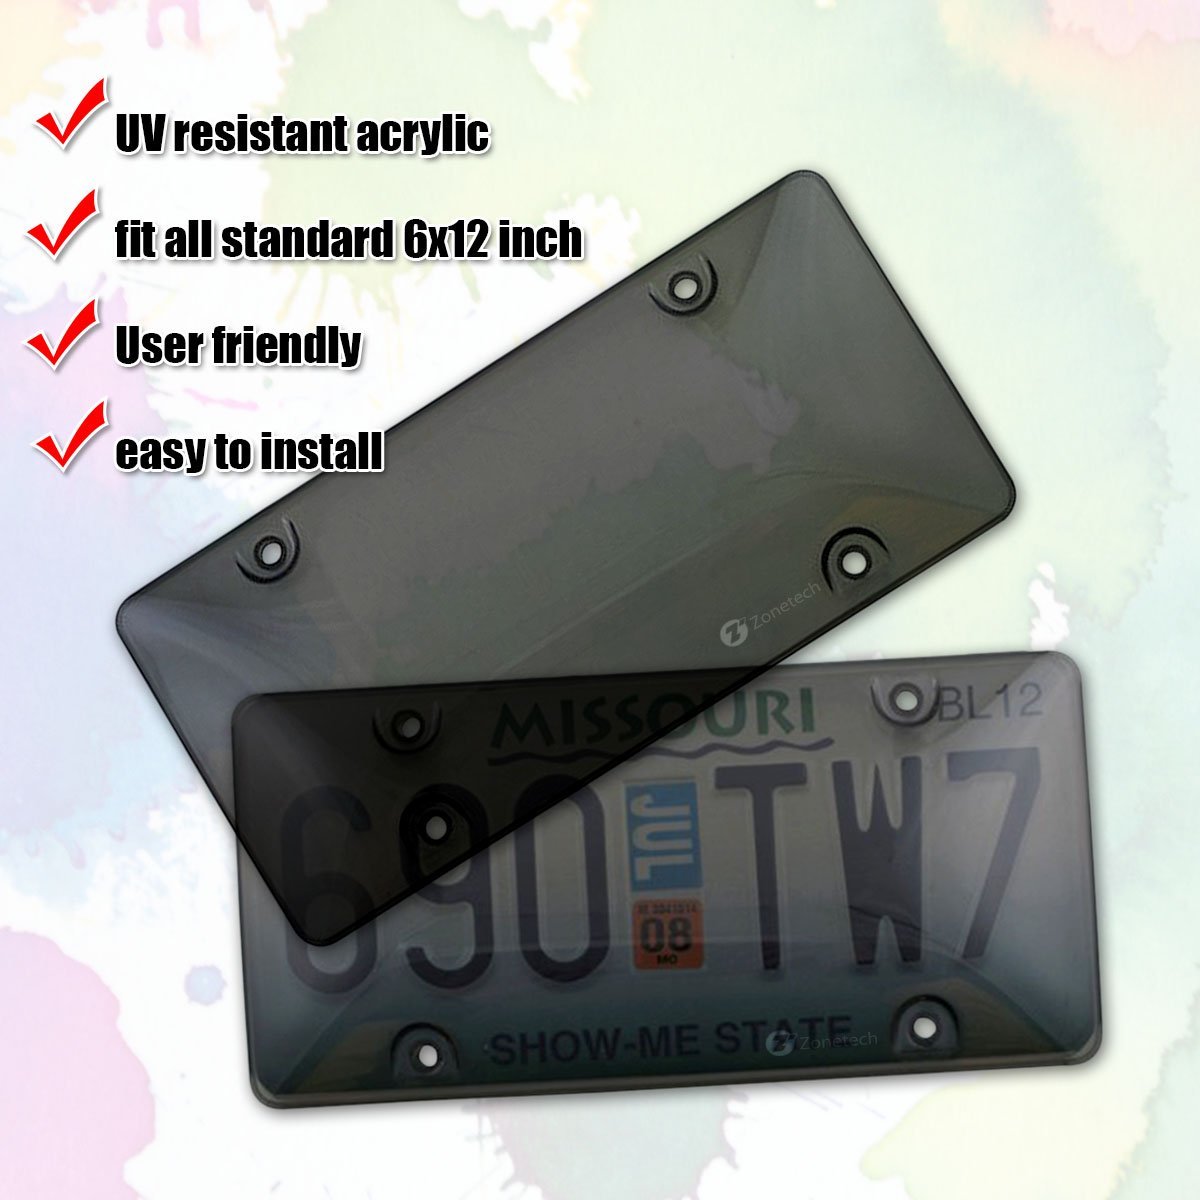 2 Black Plastic License Plate Frames Clear Bubble Shields Cover for Car-Truck